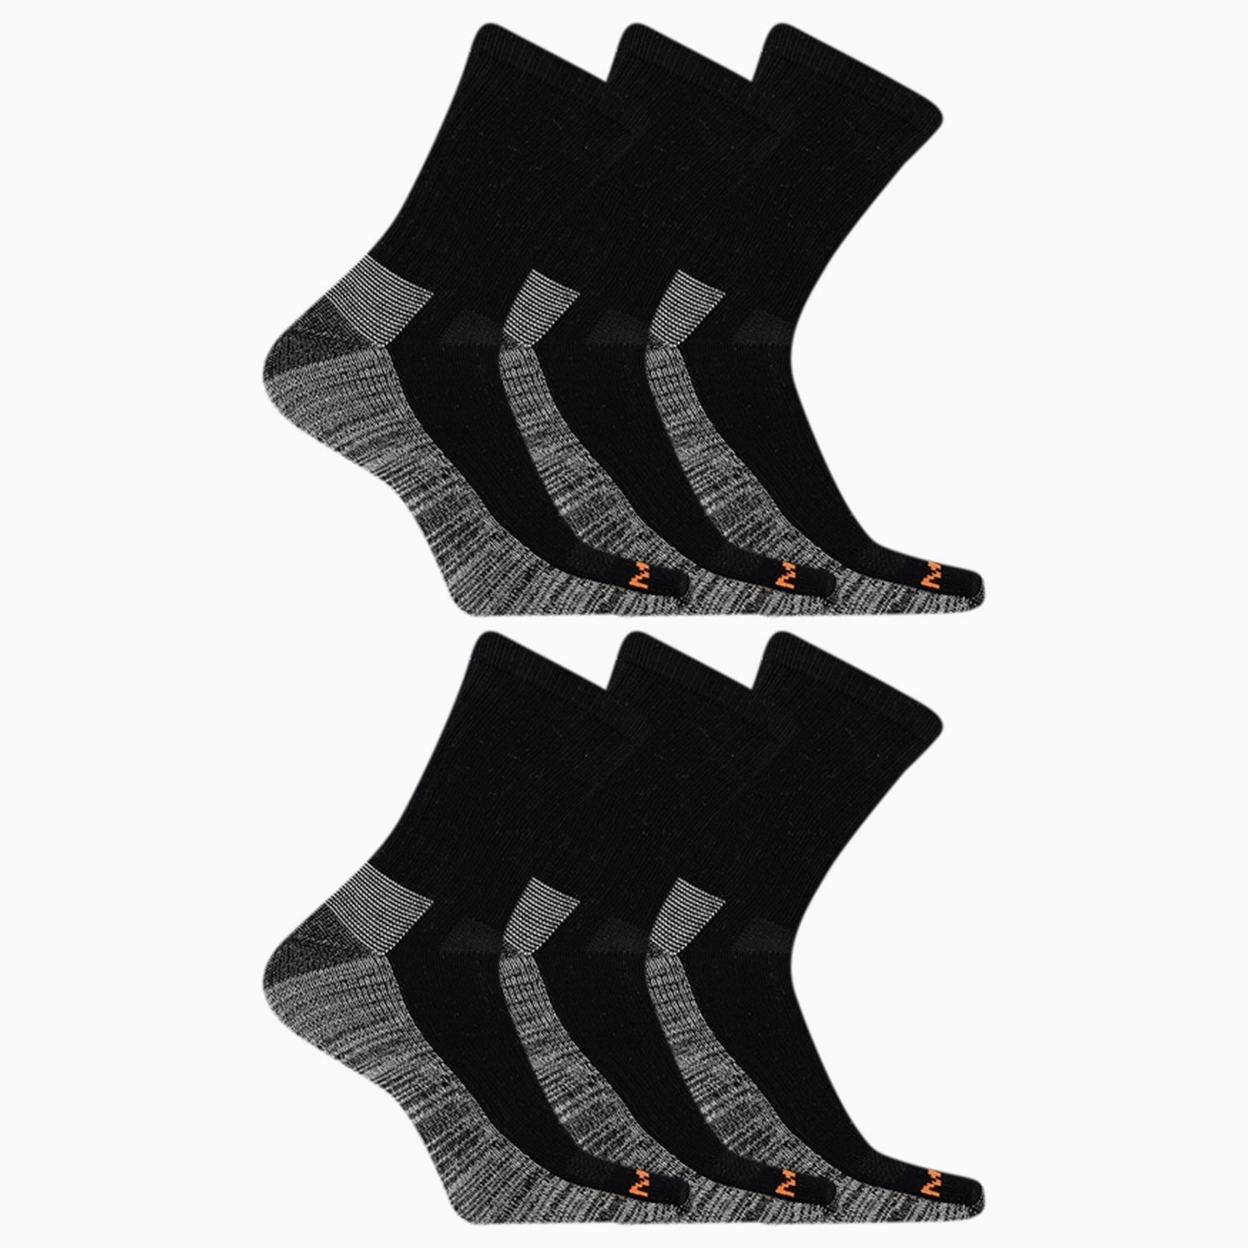 Merrell Men's And Women's Durable Everyday Work Crew Socks - Unisex 6 Pair Pack - Arch Support And Anti-Odor Cotton BLACK - BLACK, M